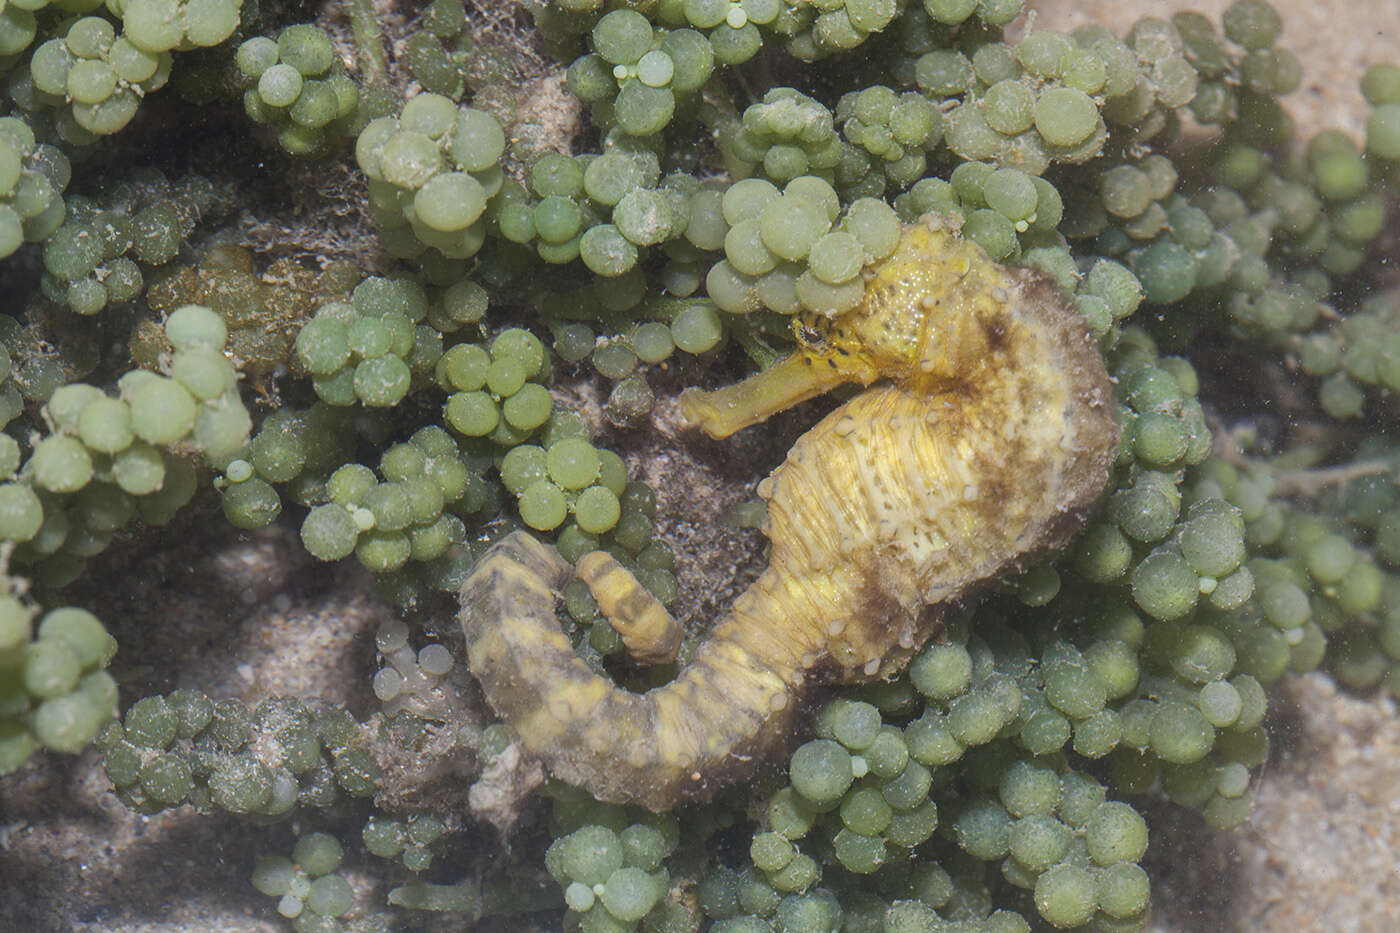 Image of Tiger Tail Seahorse